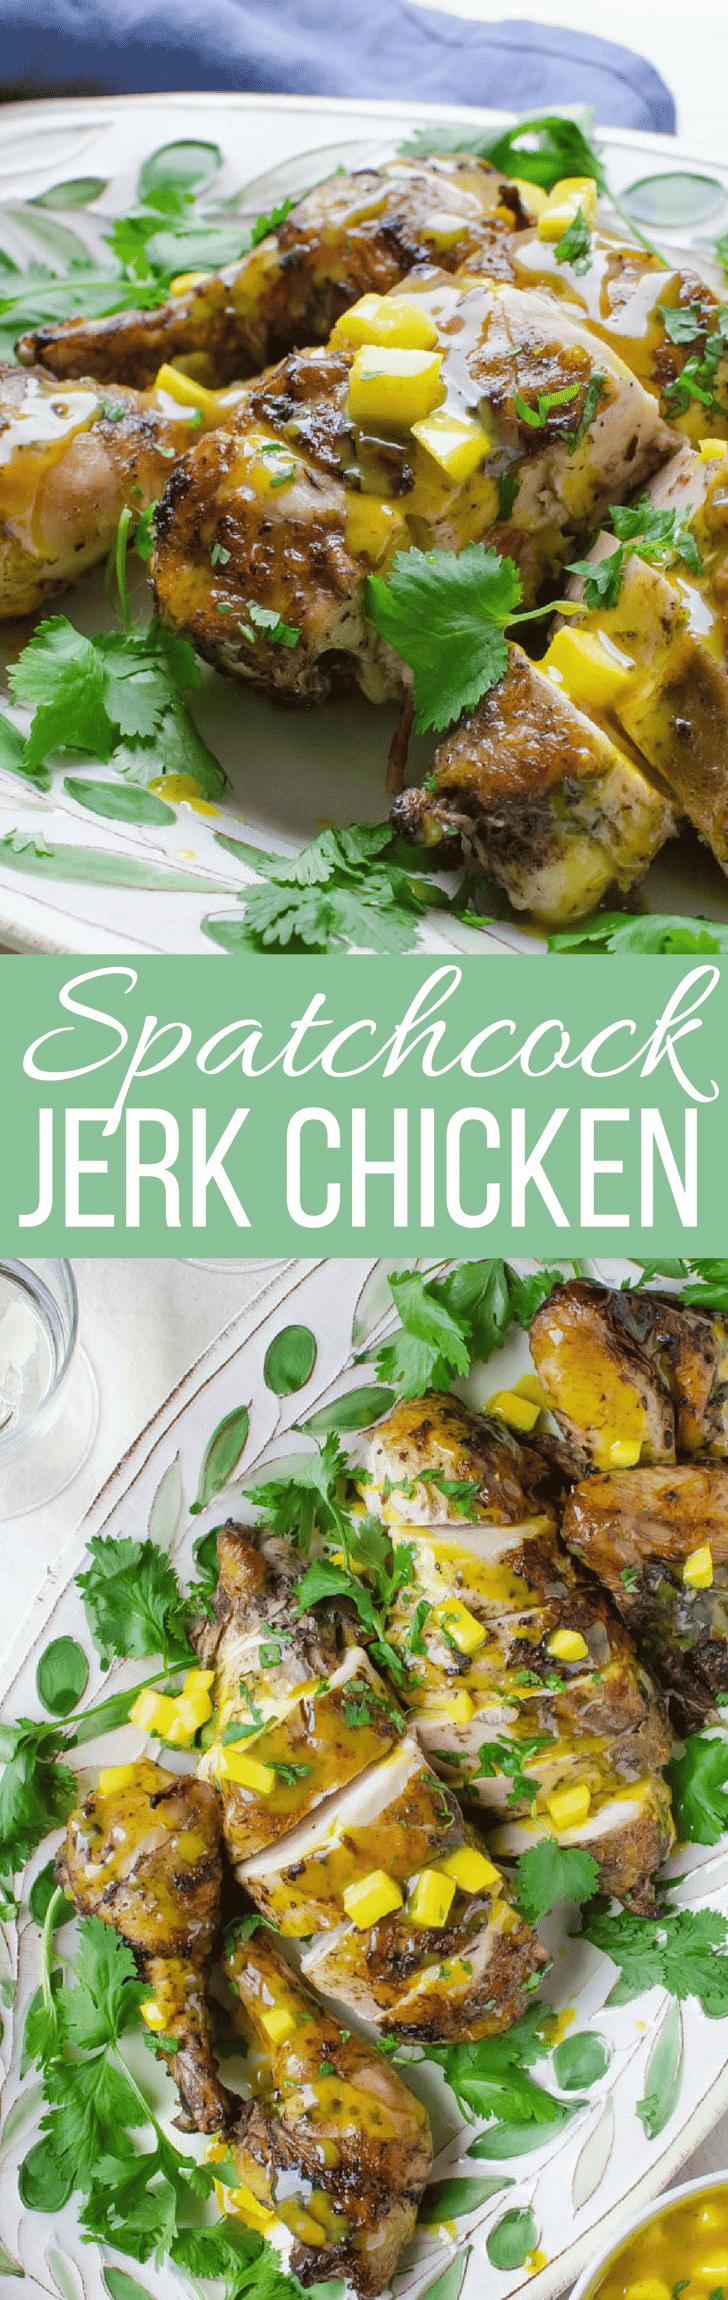 This easy jerk chicken recipe is the BEST! Spatchcock Jerk Chicken with Sweet Curry uses a special jerk seasoning and a raging hot cast iron skillet!